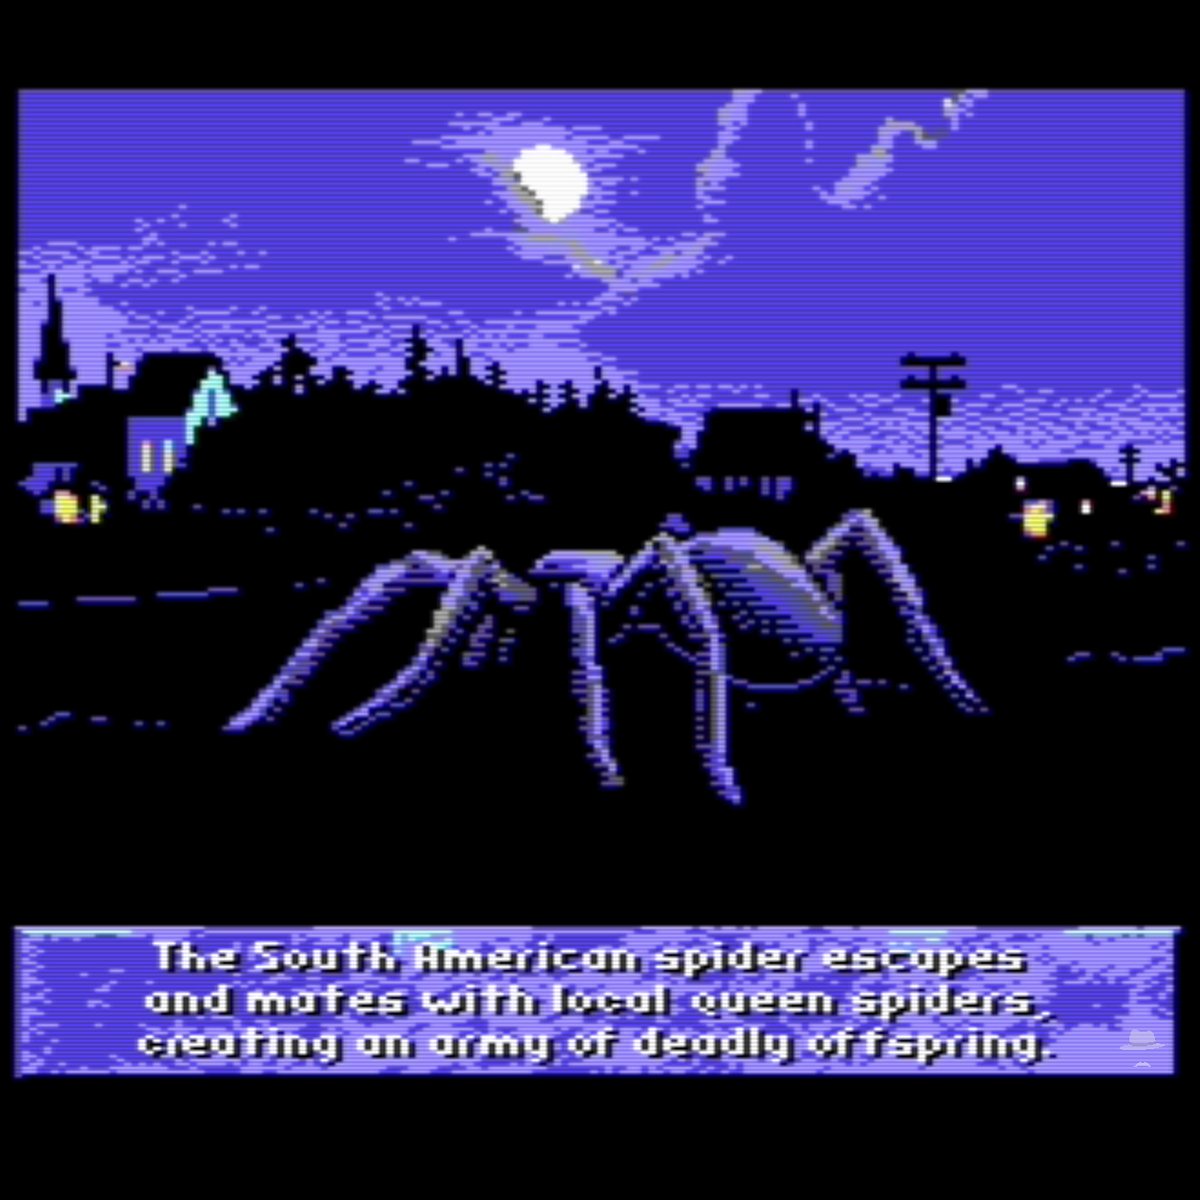 If you are even a tiny bit into #Halloween, you will love #Arachnophobia for the #Commodore64. It is not a blood-curdling #Game, but it is scary enough to give you #Goosebumps... #Retro #RetroComputing #RetroComputer #RetroGaming #RetroGame #Commodore #C64 #C64c